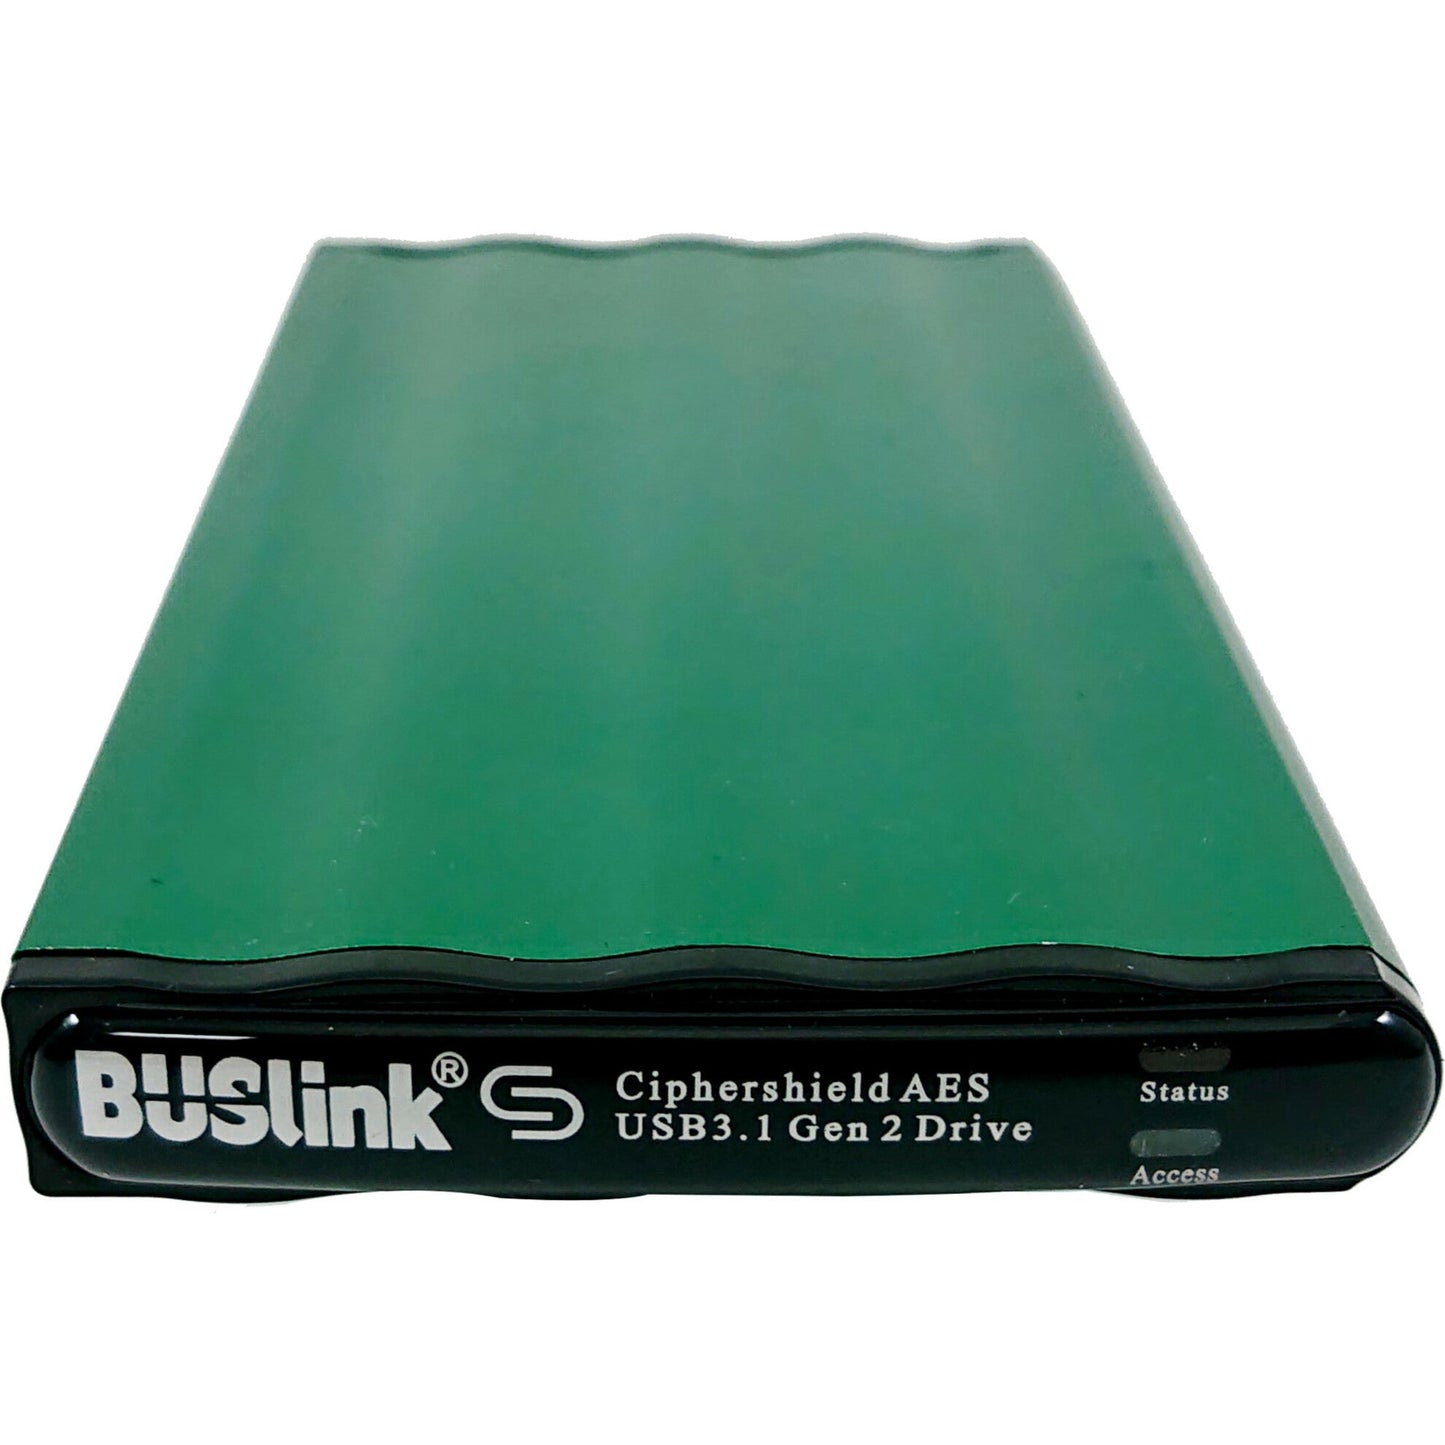 Buslink Disk-On-The-Go DSE-7T6SDG2C 7.60 TB Portable Solid State Drive - 2.5" External - TAA Compliant